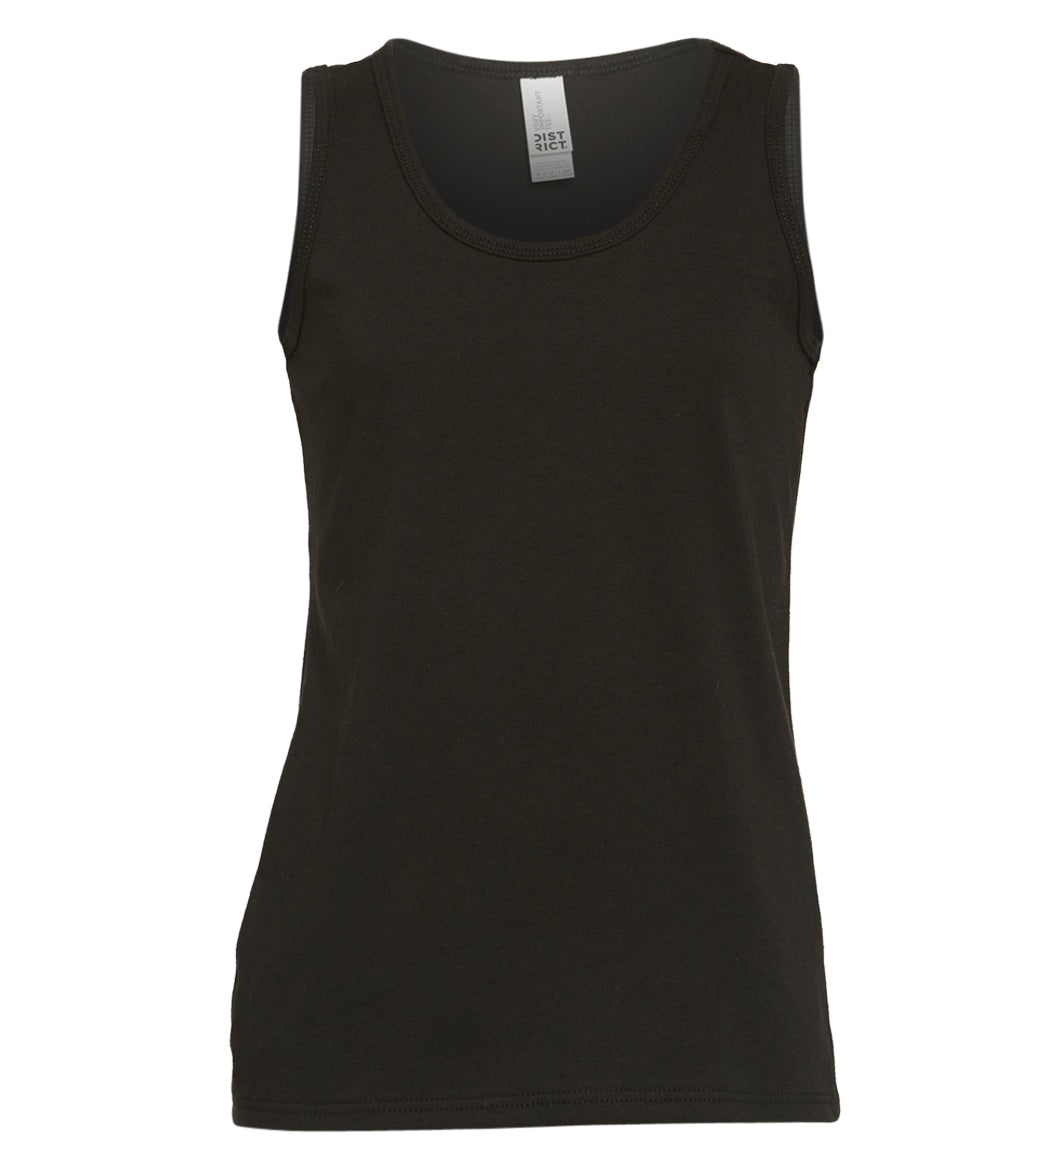 SwimOutlet Girls Ribbed Neck Tank Top